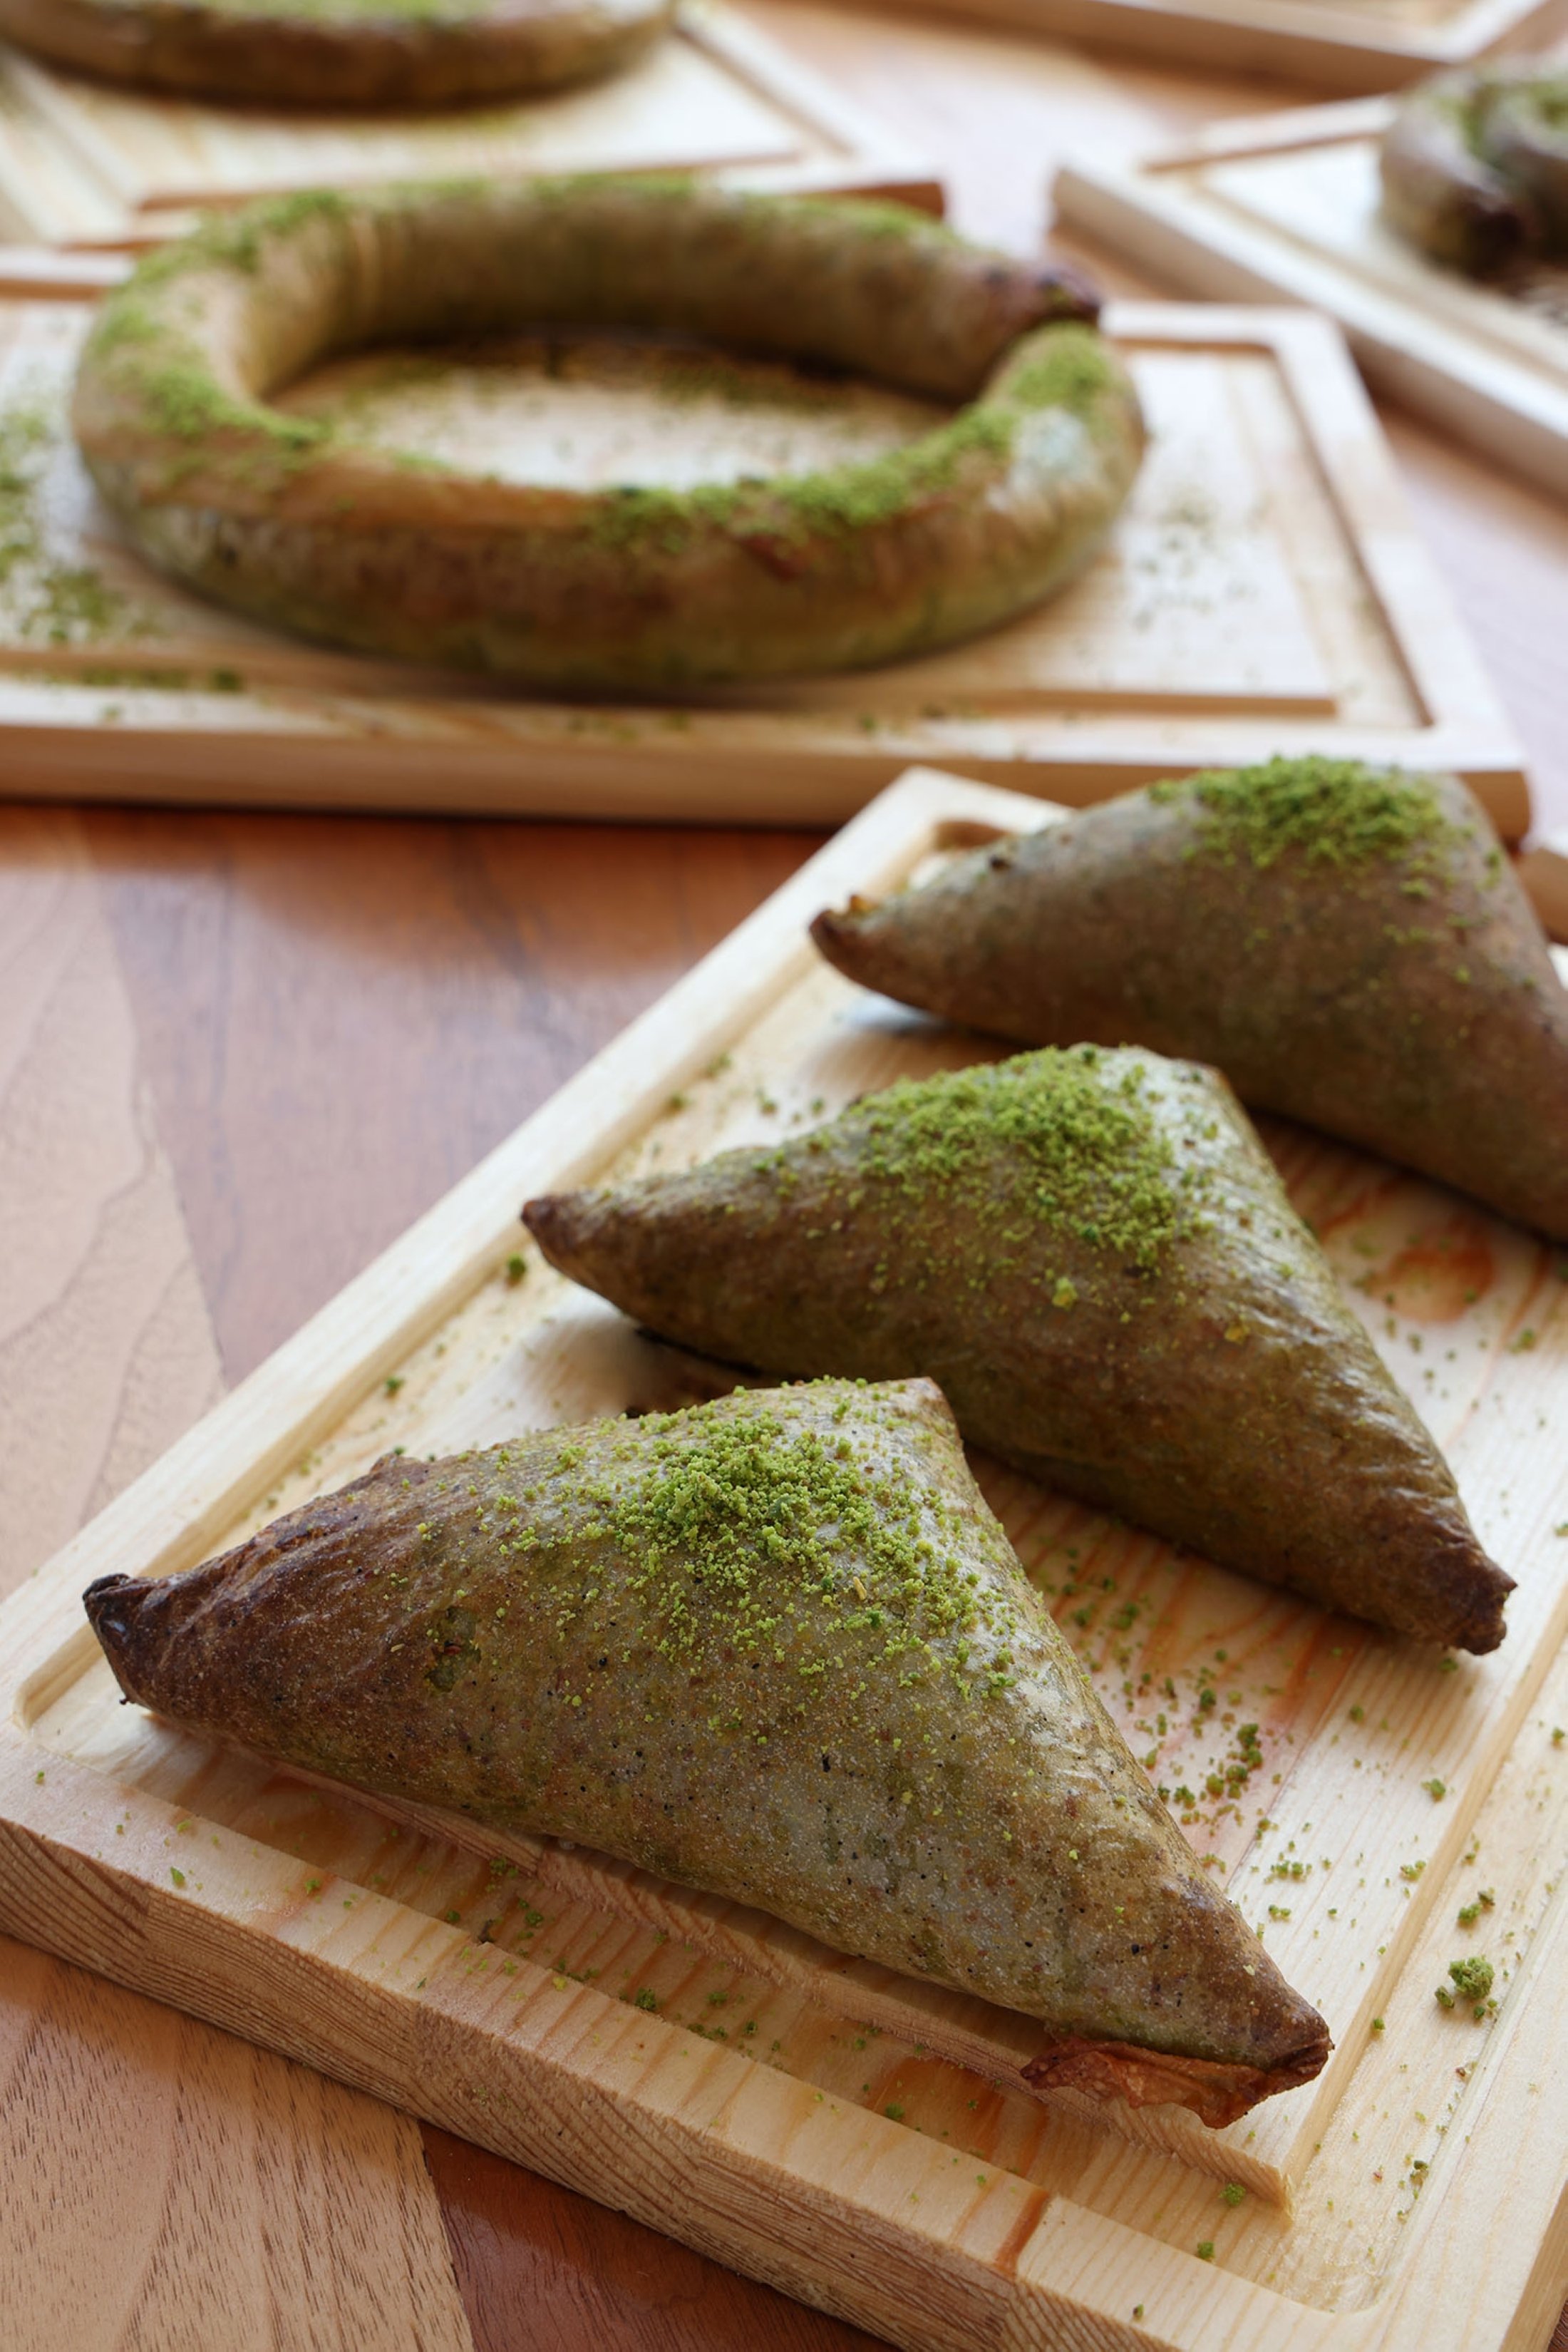 Katmer is a delicious dessert that oozes with syrup and the ground pistachios it is covered in. (Getty Images Photo)